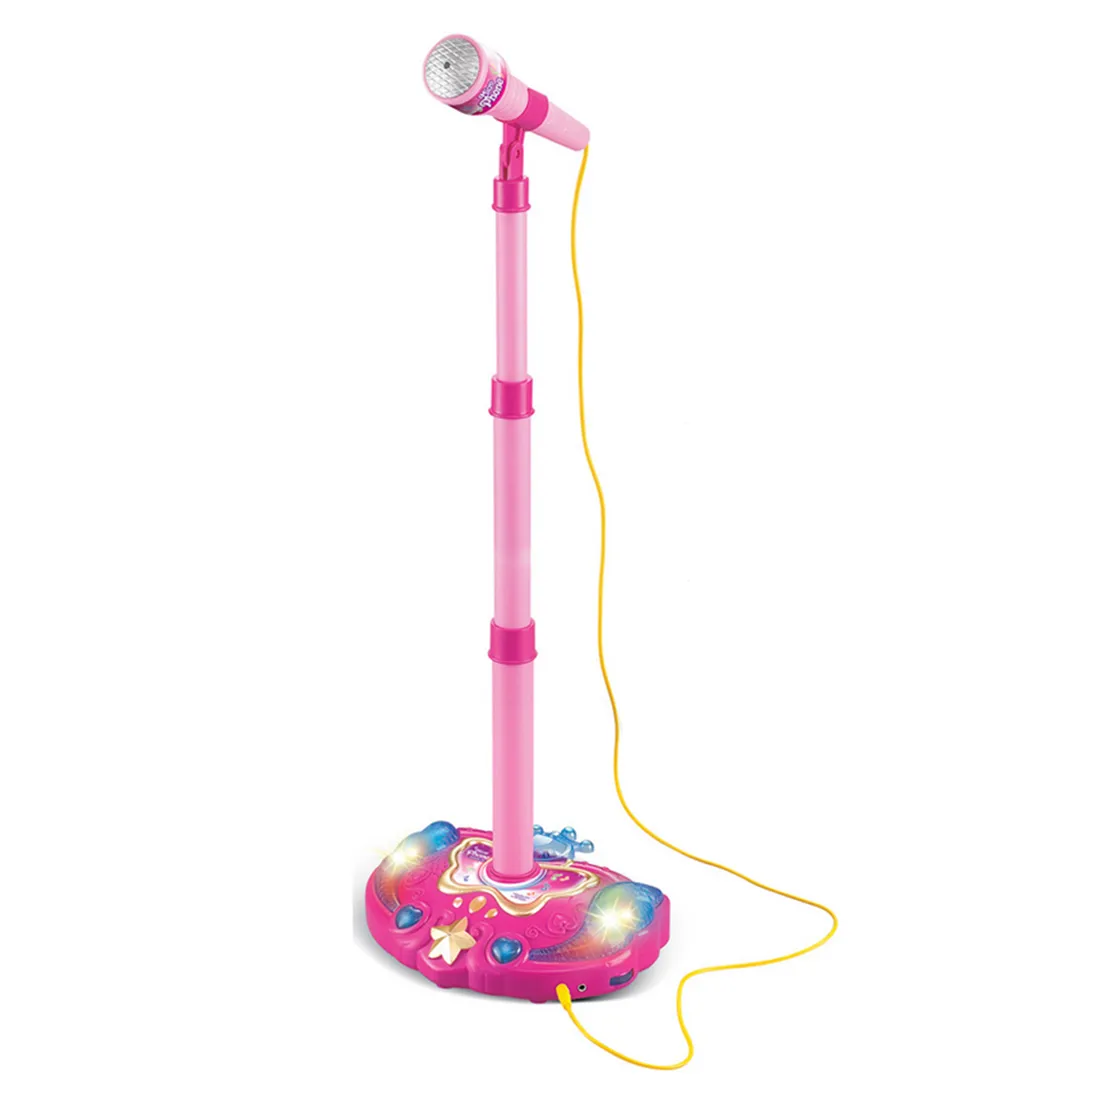 Hot Sale Kids Girls Karaoke Adjustable Stand Microphone Music Microphone Toy Musical Instrument with Light Effect Christmas Gift LJ200907